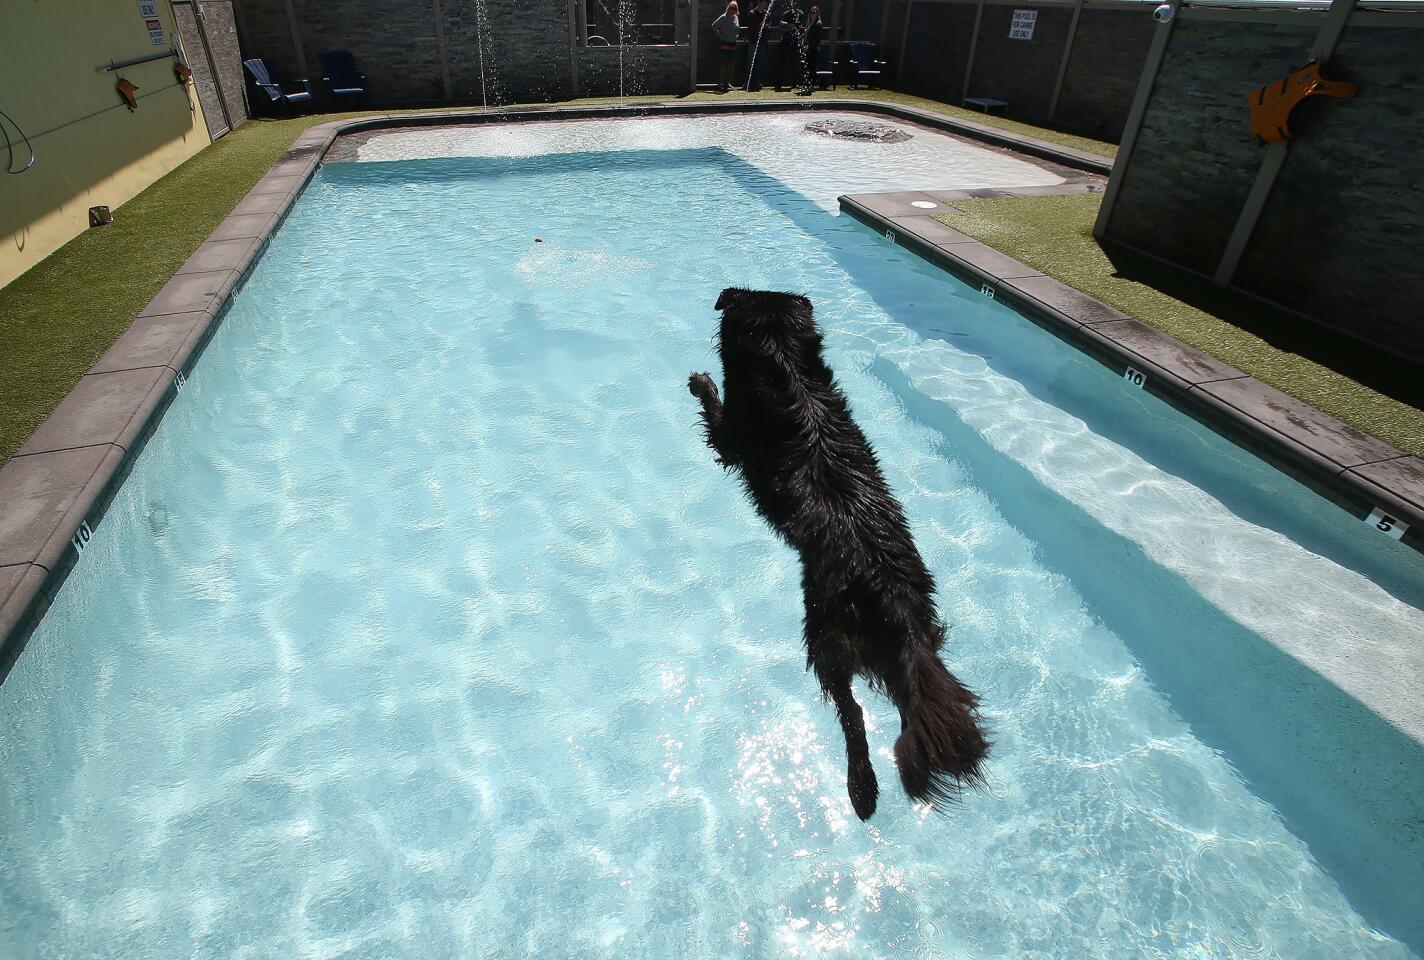 Poppy Bear leaps off the dock into the new the 50-foot long, 4-foot deep swimming pool at The Bone Adventure's new swim club for dogs in Costa Mesa.The Swim Club includes a 40-foot regulation size platform for dock diving, sun decks, and water fountains.